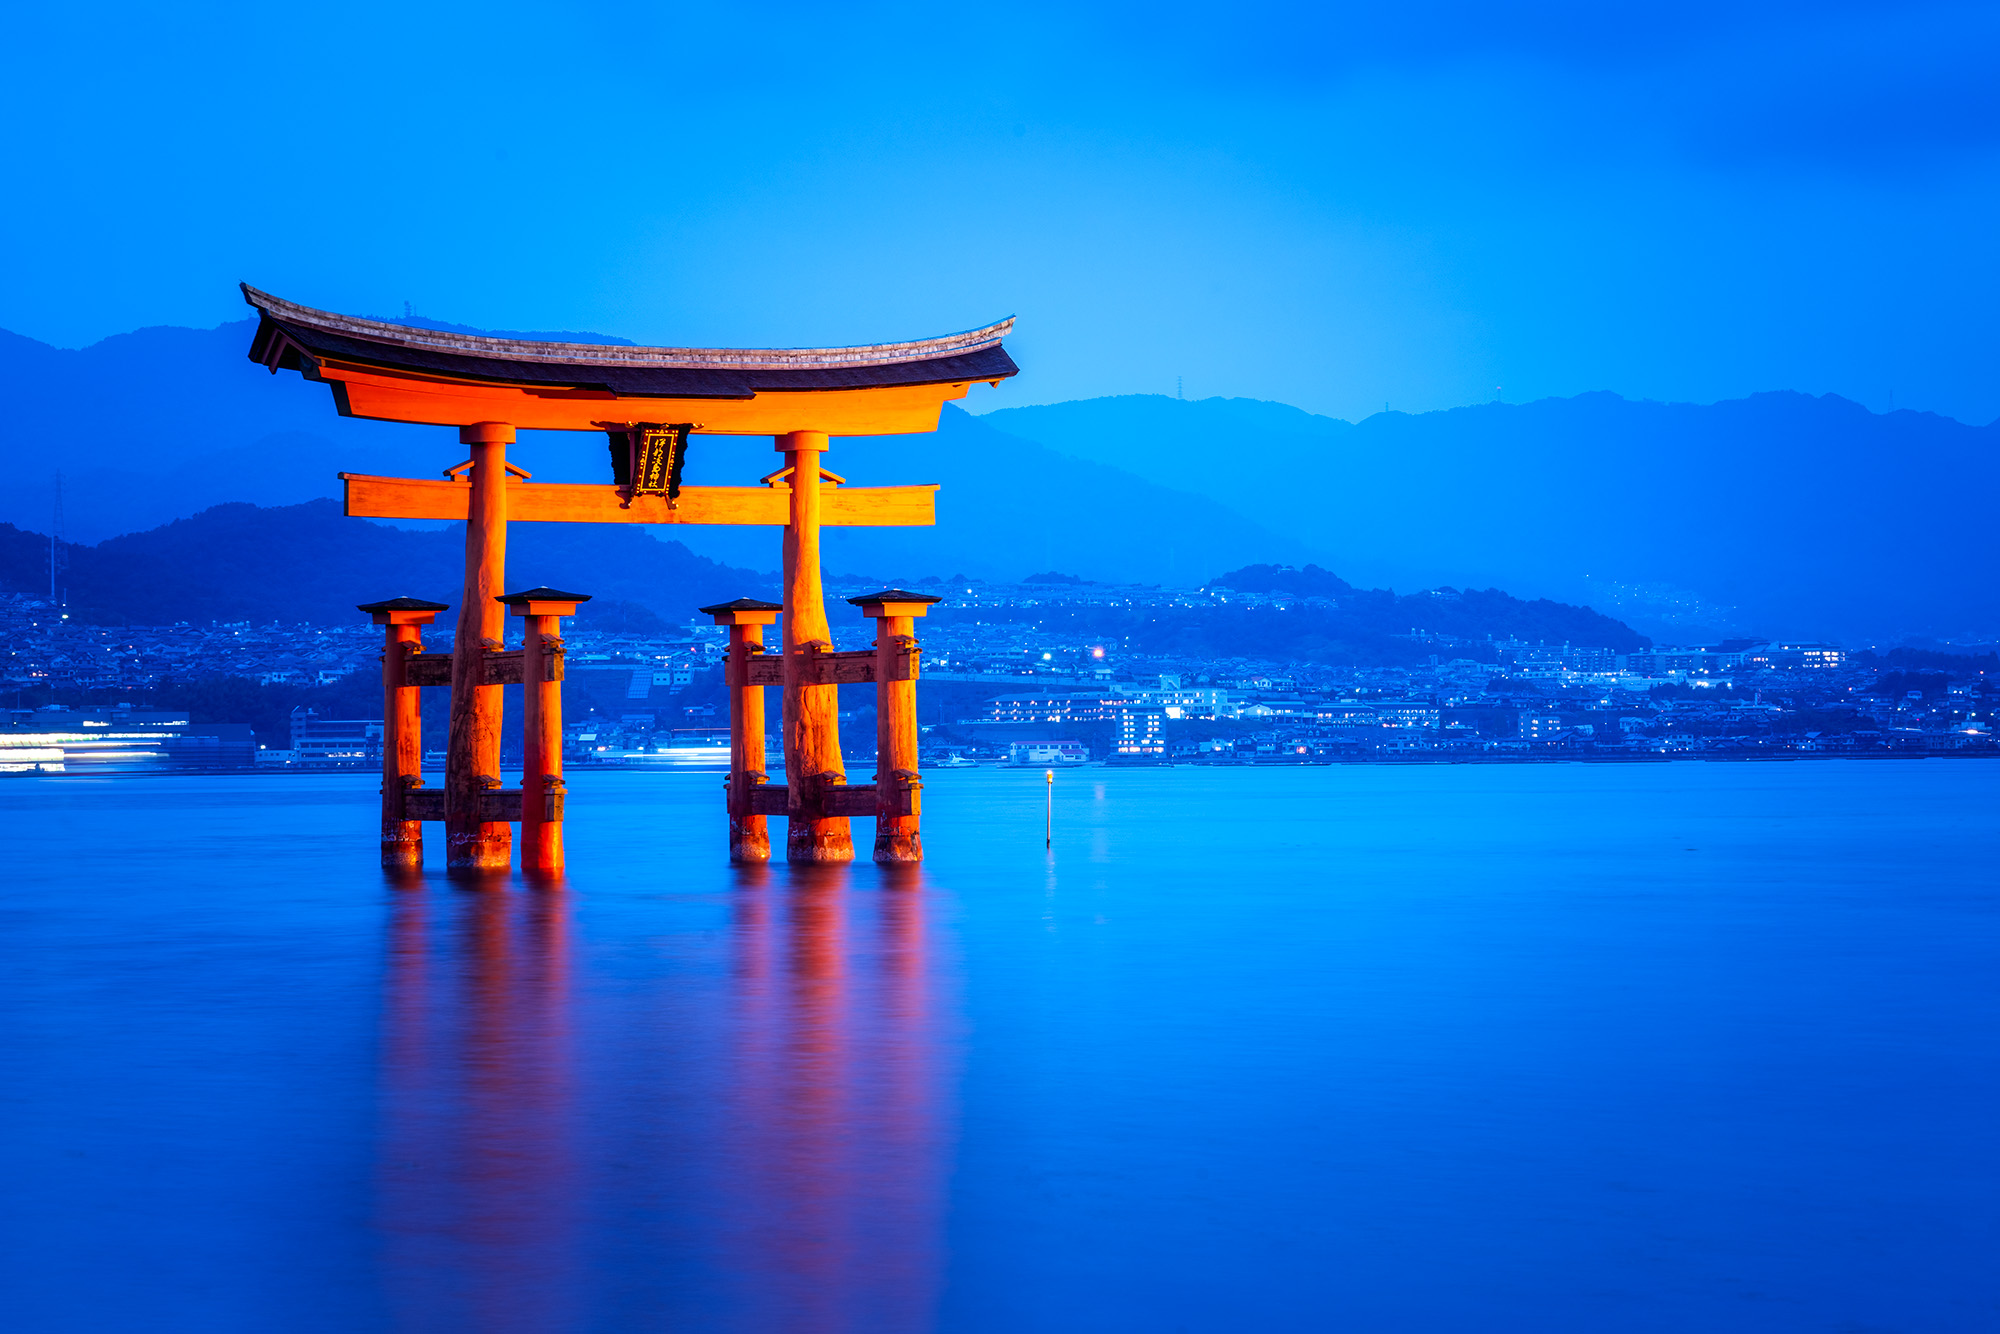 This mesmerizing image captures the serene beauty of the Itsukushima Jinja Otorii during blue hour. The vibrant vermillion of...